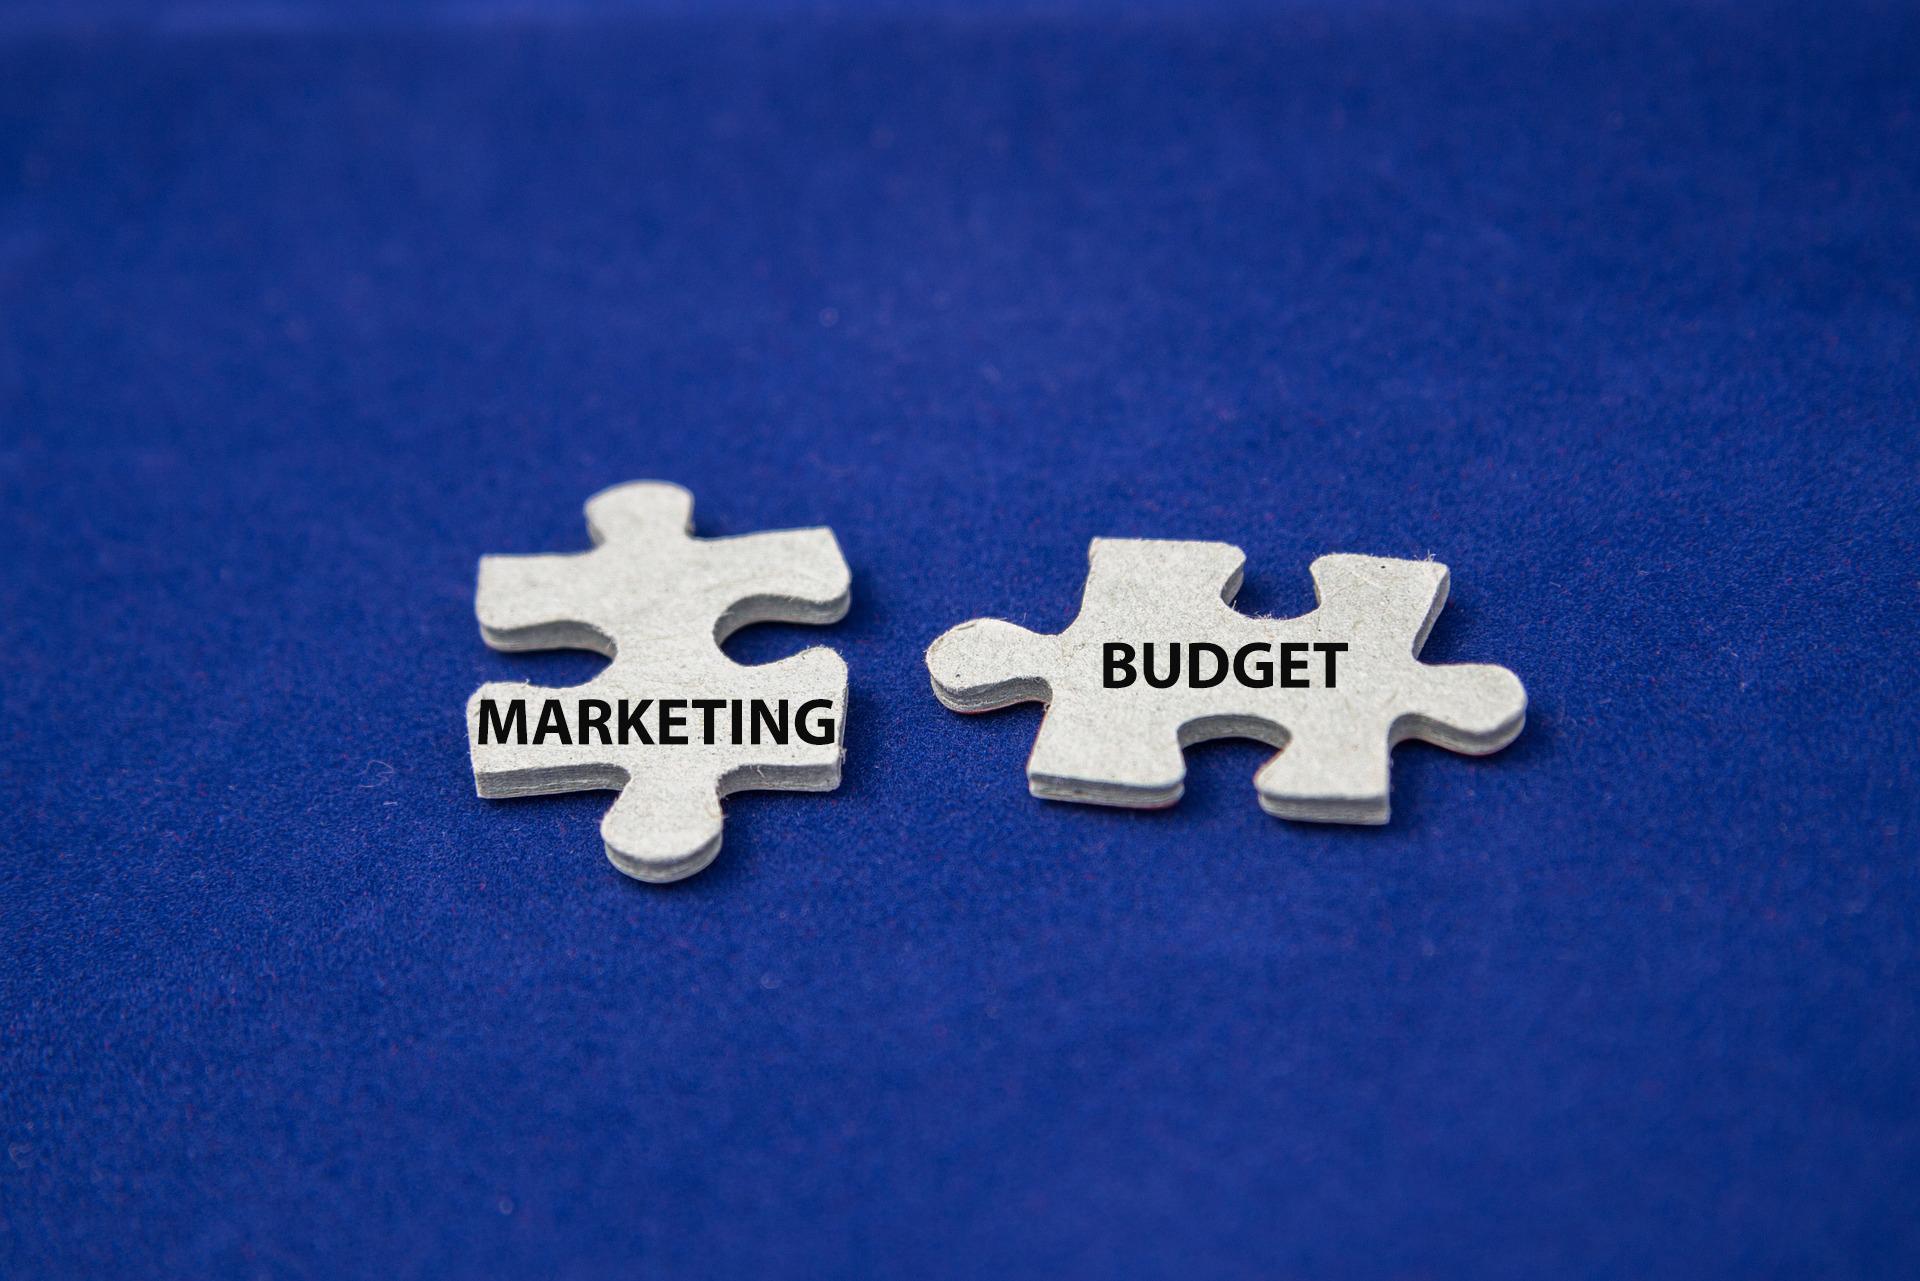 Marketing and budget